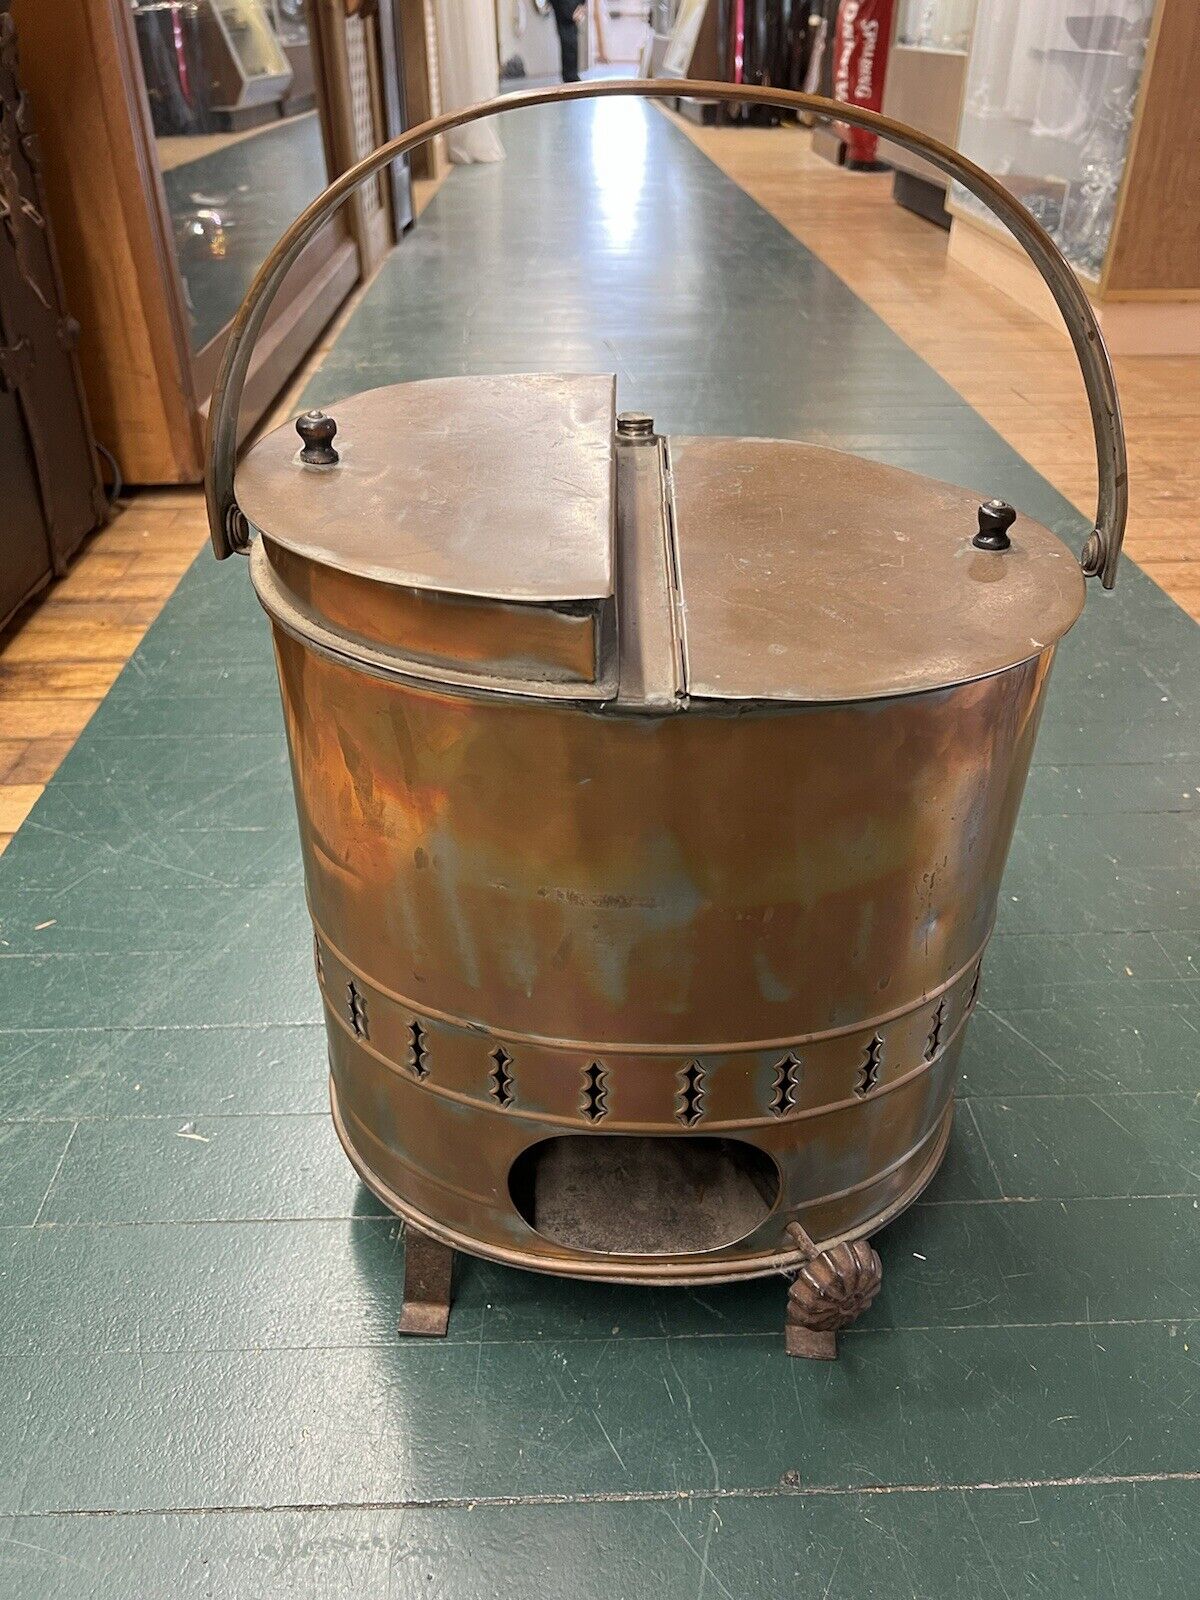 Antique Copper Hotdog Vendor Steamer, From  NYC Great Find Piece Of History